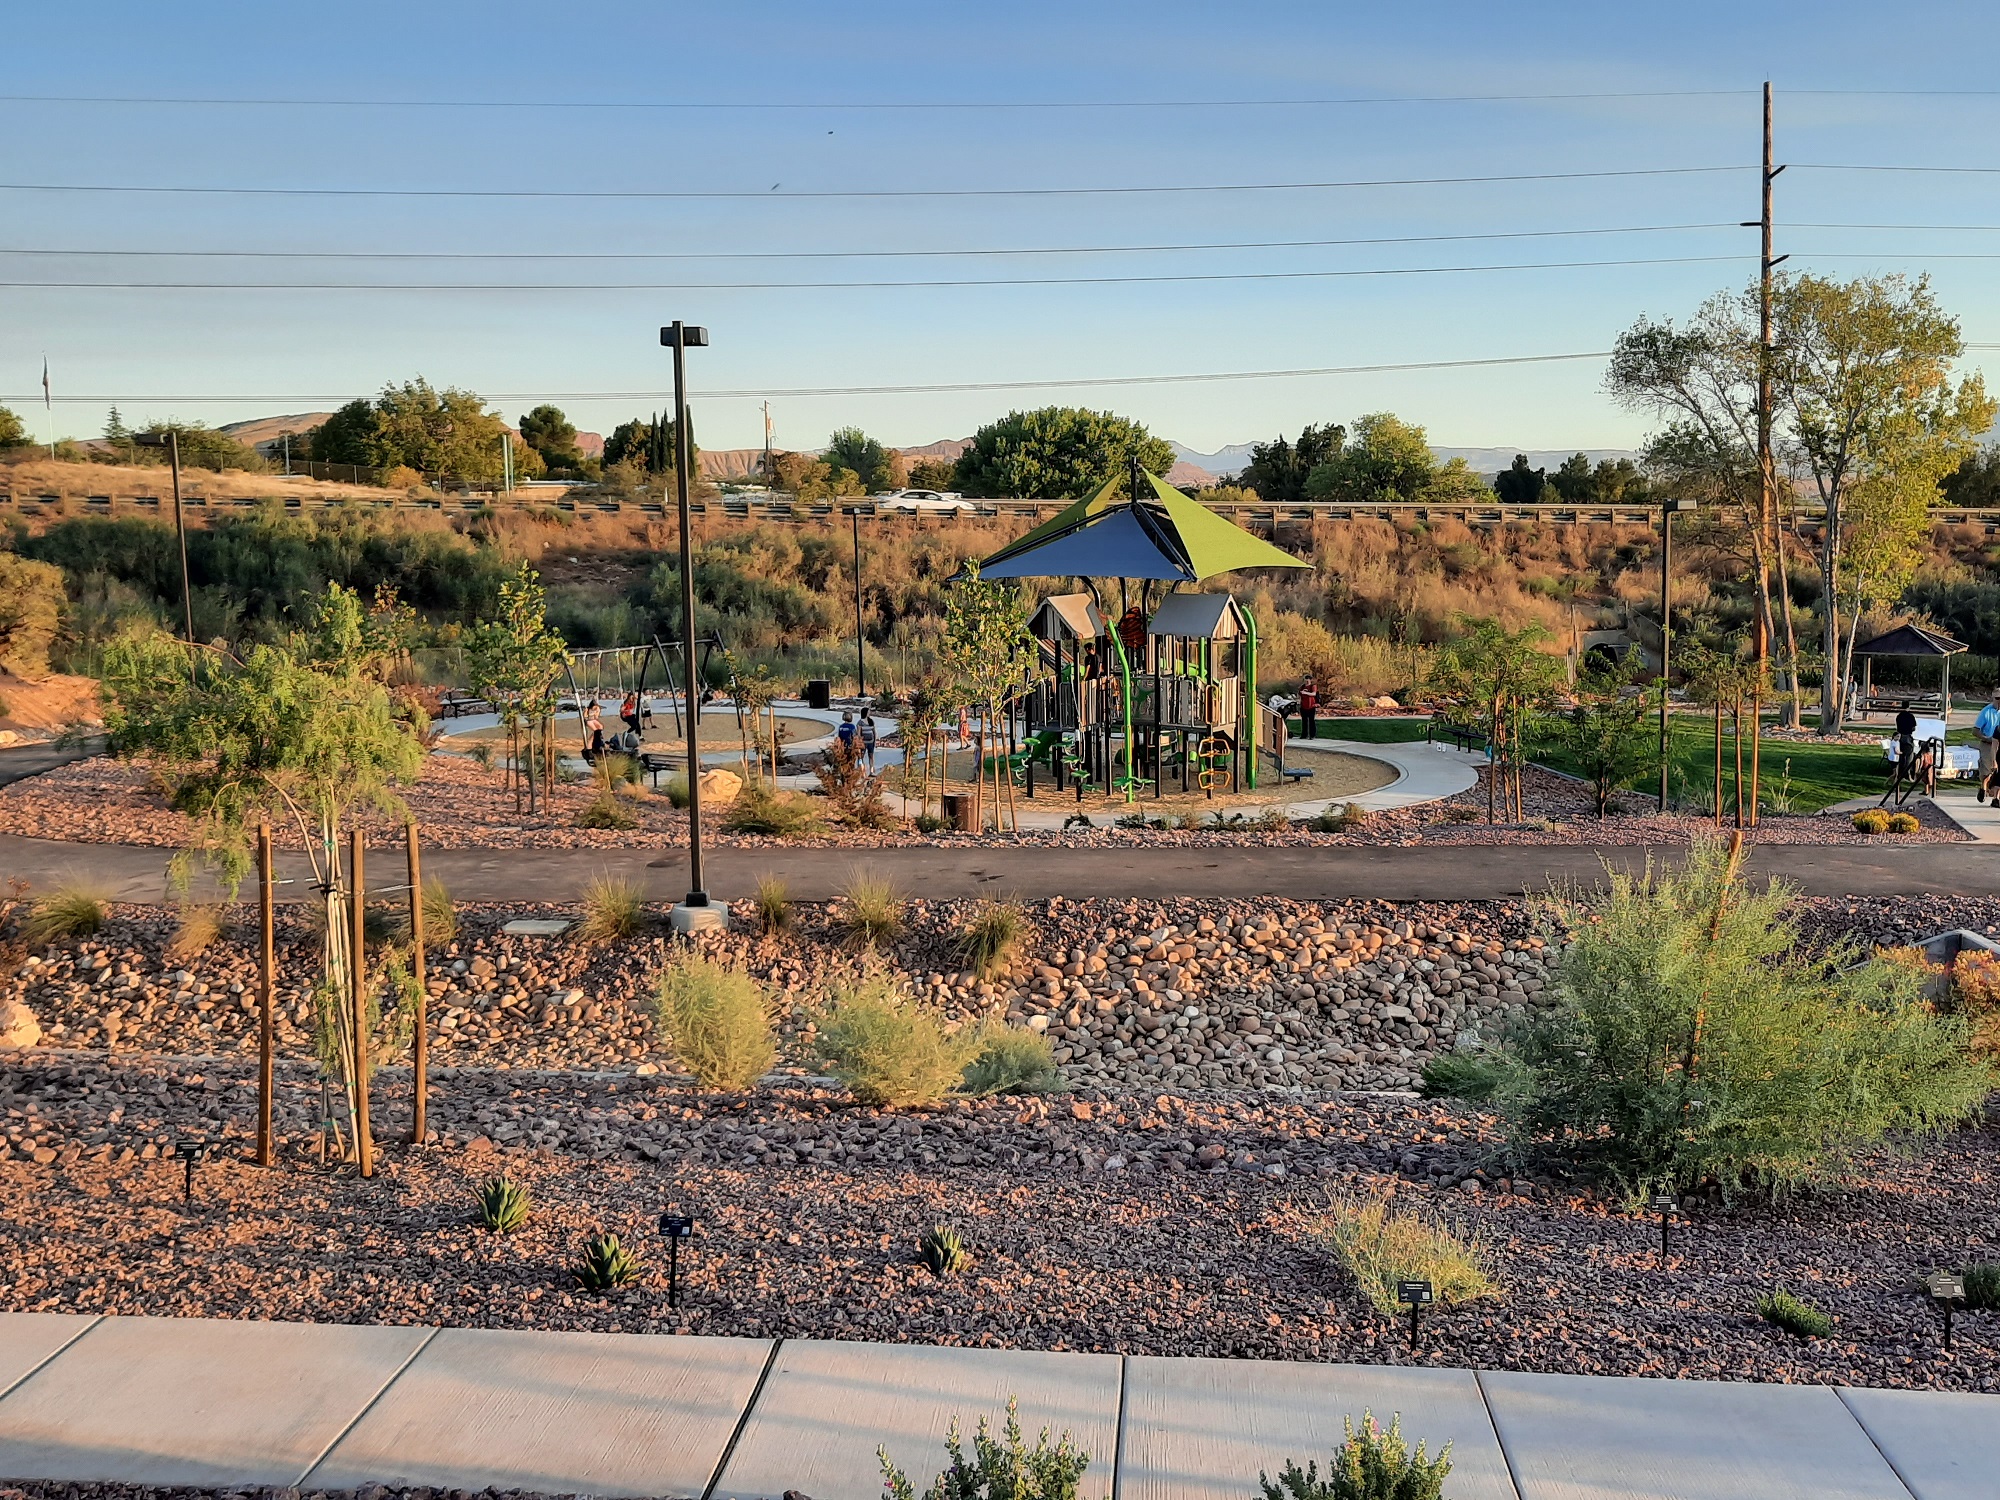 The playground at the new Boilers Park in Washington, Utah